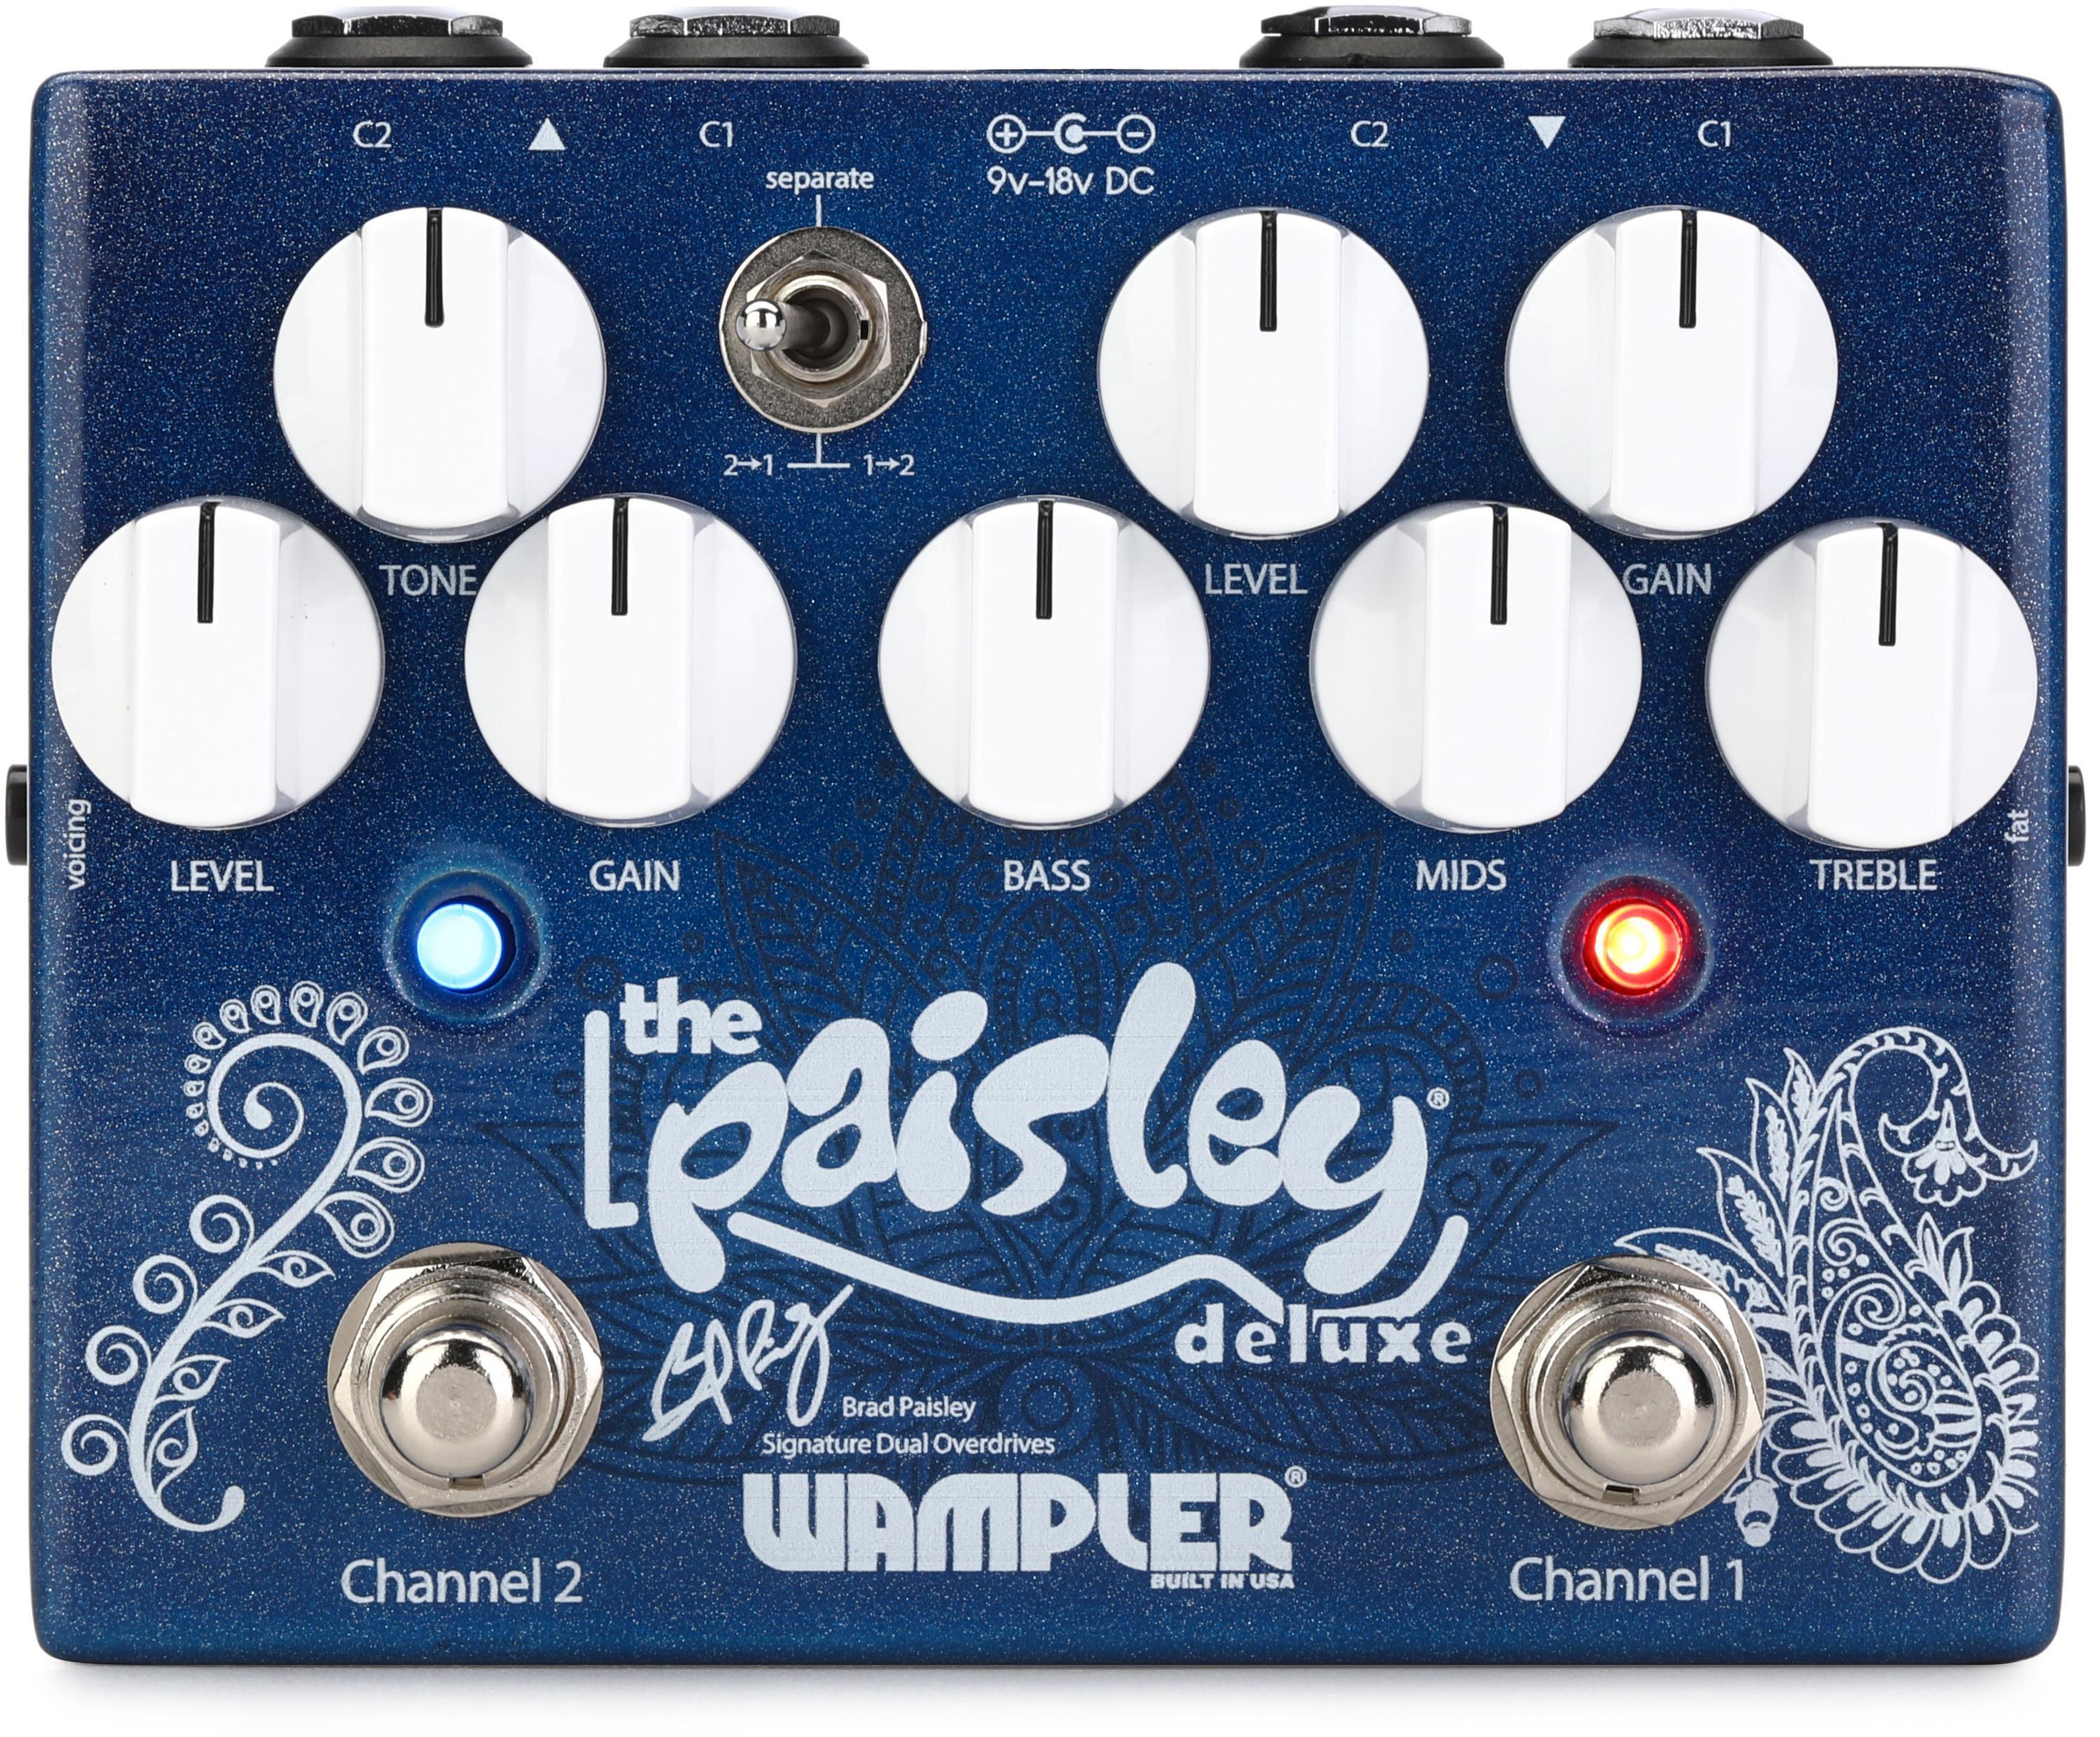 Bundled Item: Wampler Paisley Drive Deluxe Overdrive Pedal